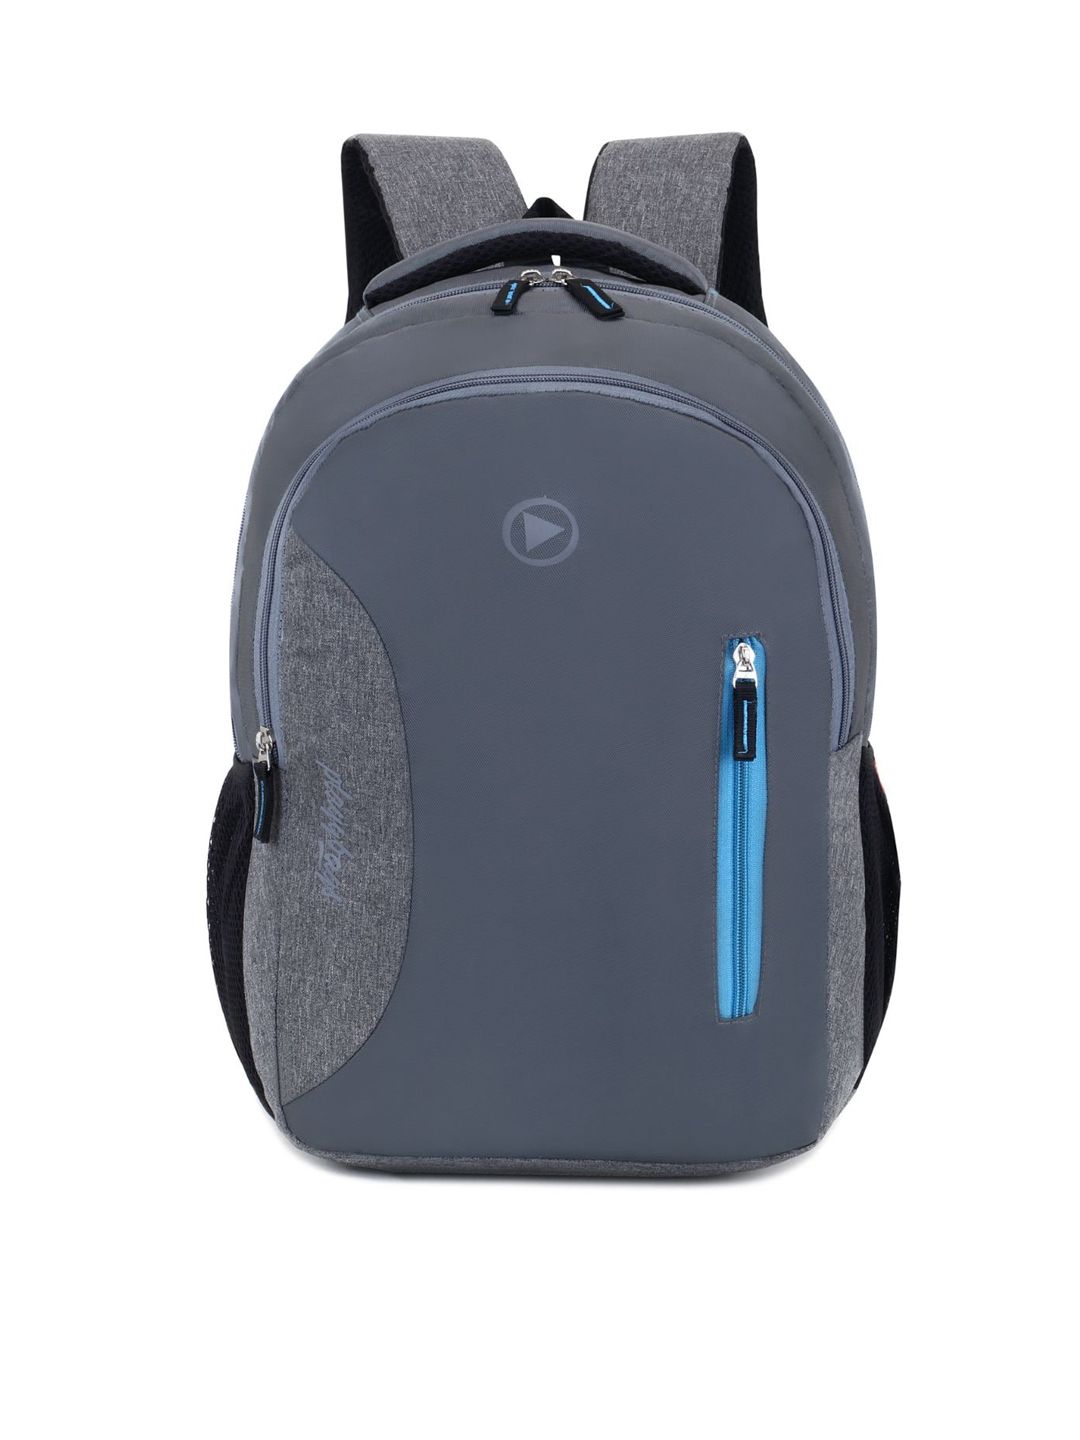 PLAYYBAGS Unisex Grey Backpacks Price in India